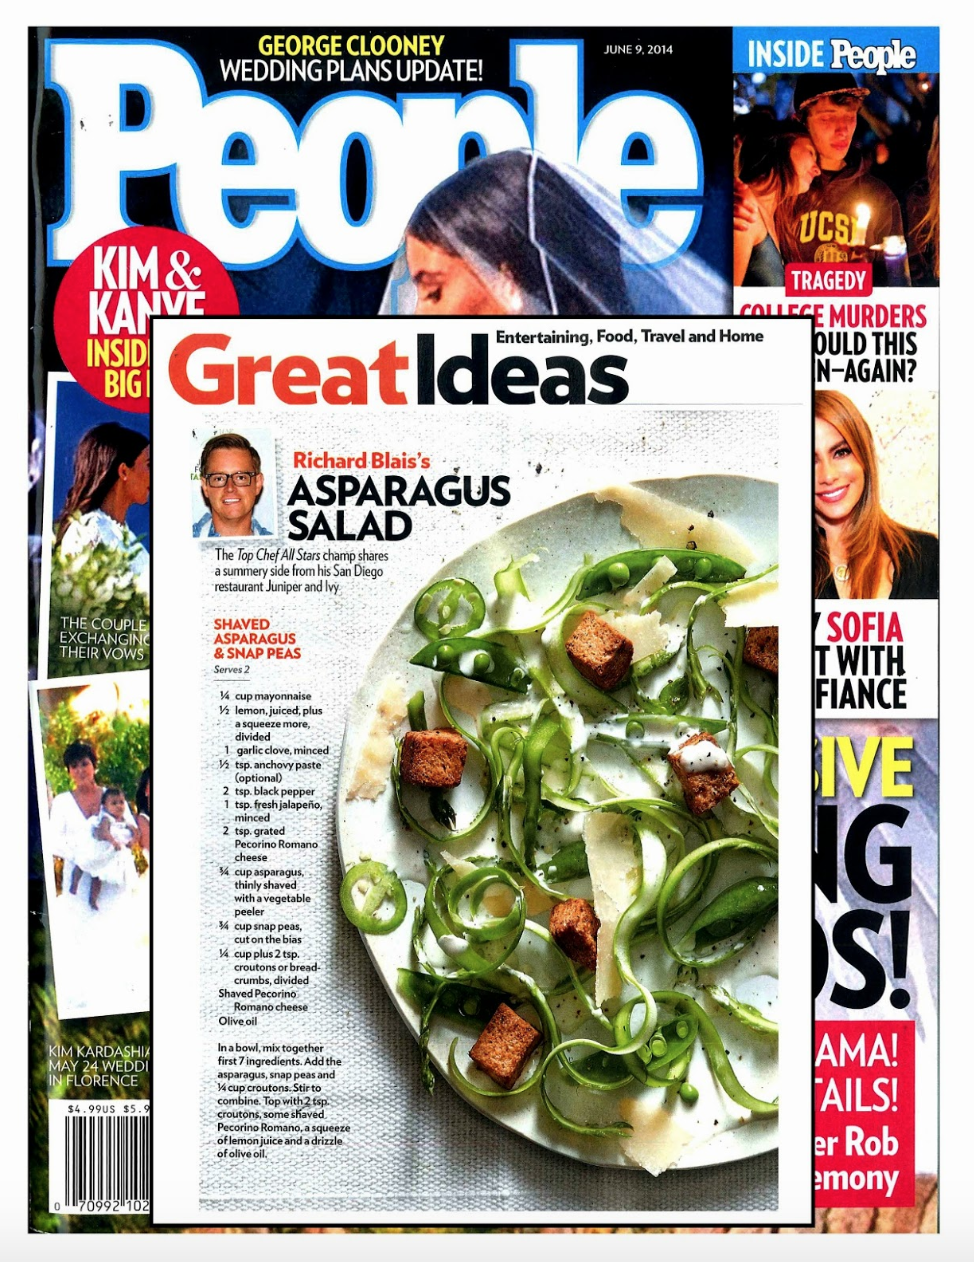 Asparagus Salad by Richard Blais on the cover of People Magazine